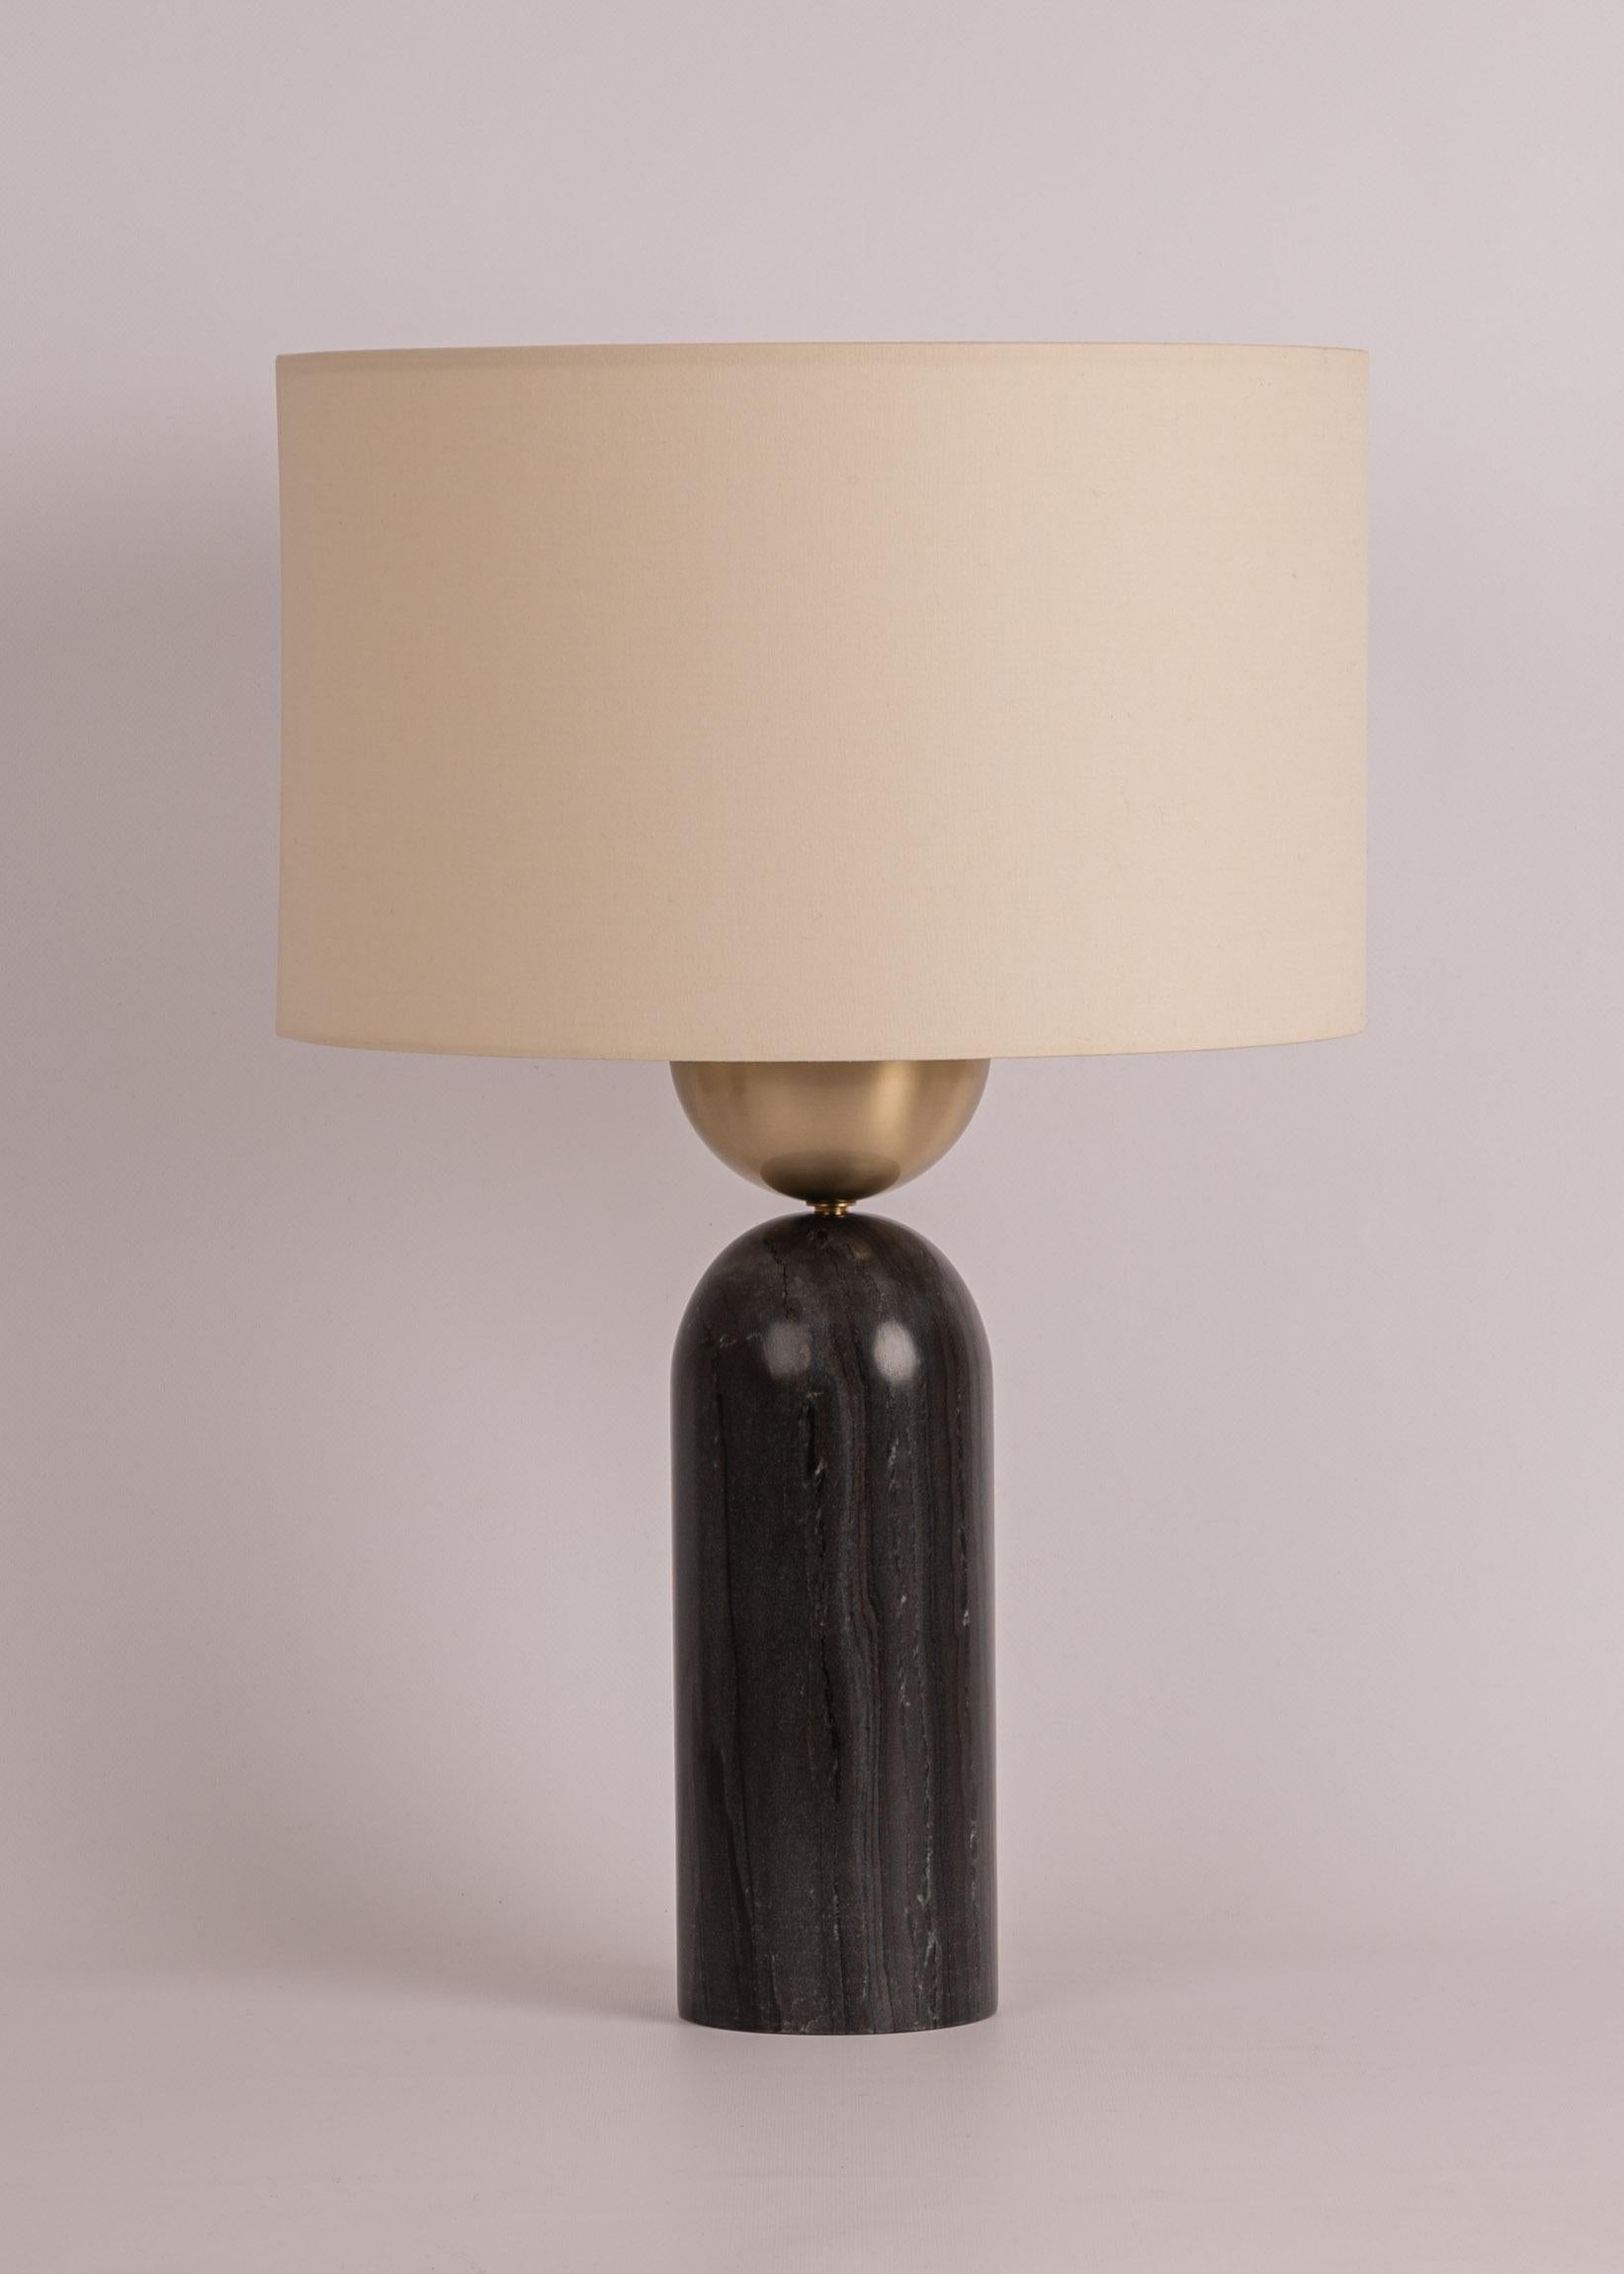 Black Marble Peona Table Lamp by Simone & Marcel
Dimensions: Ø 40 x H 61 cm.
Materials: Brass, cotton and black marble.

Also available in different marble, wood and alabaster options and finishes. Custom options available on request. Please contact